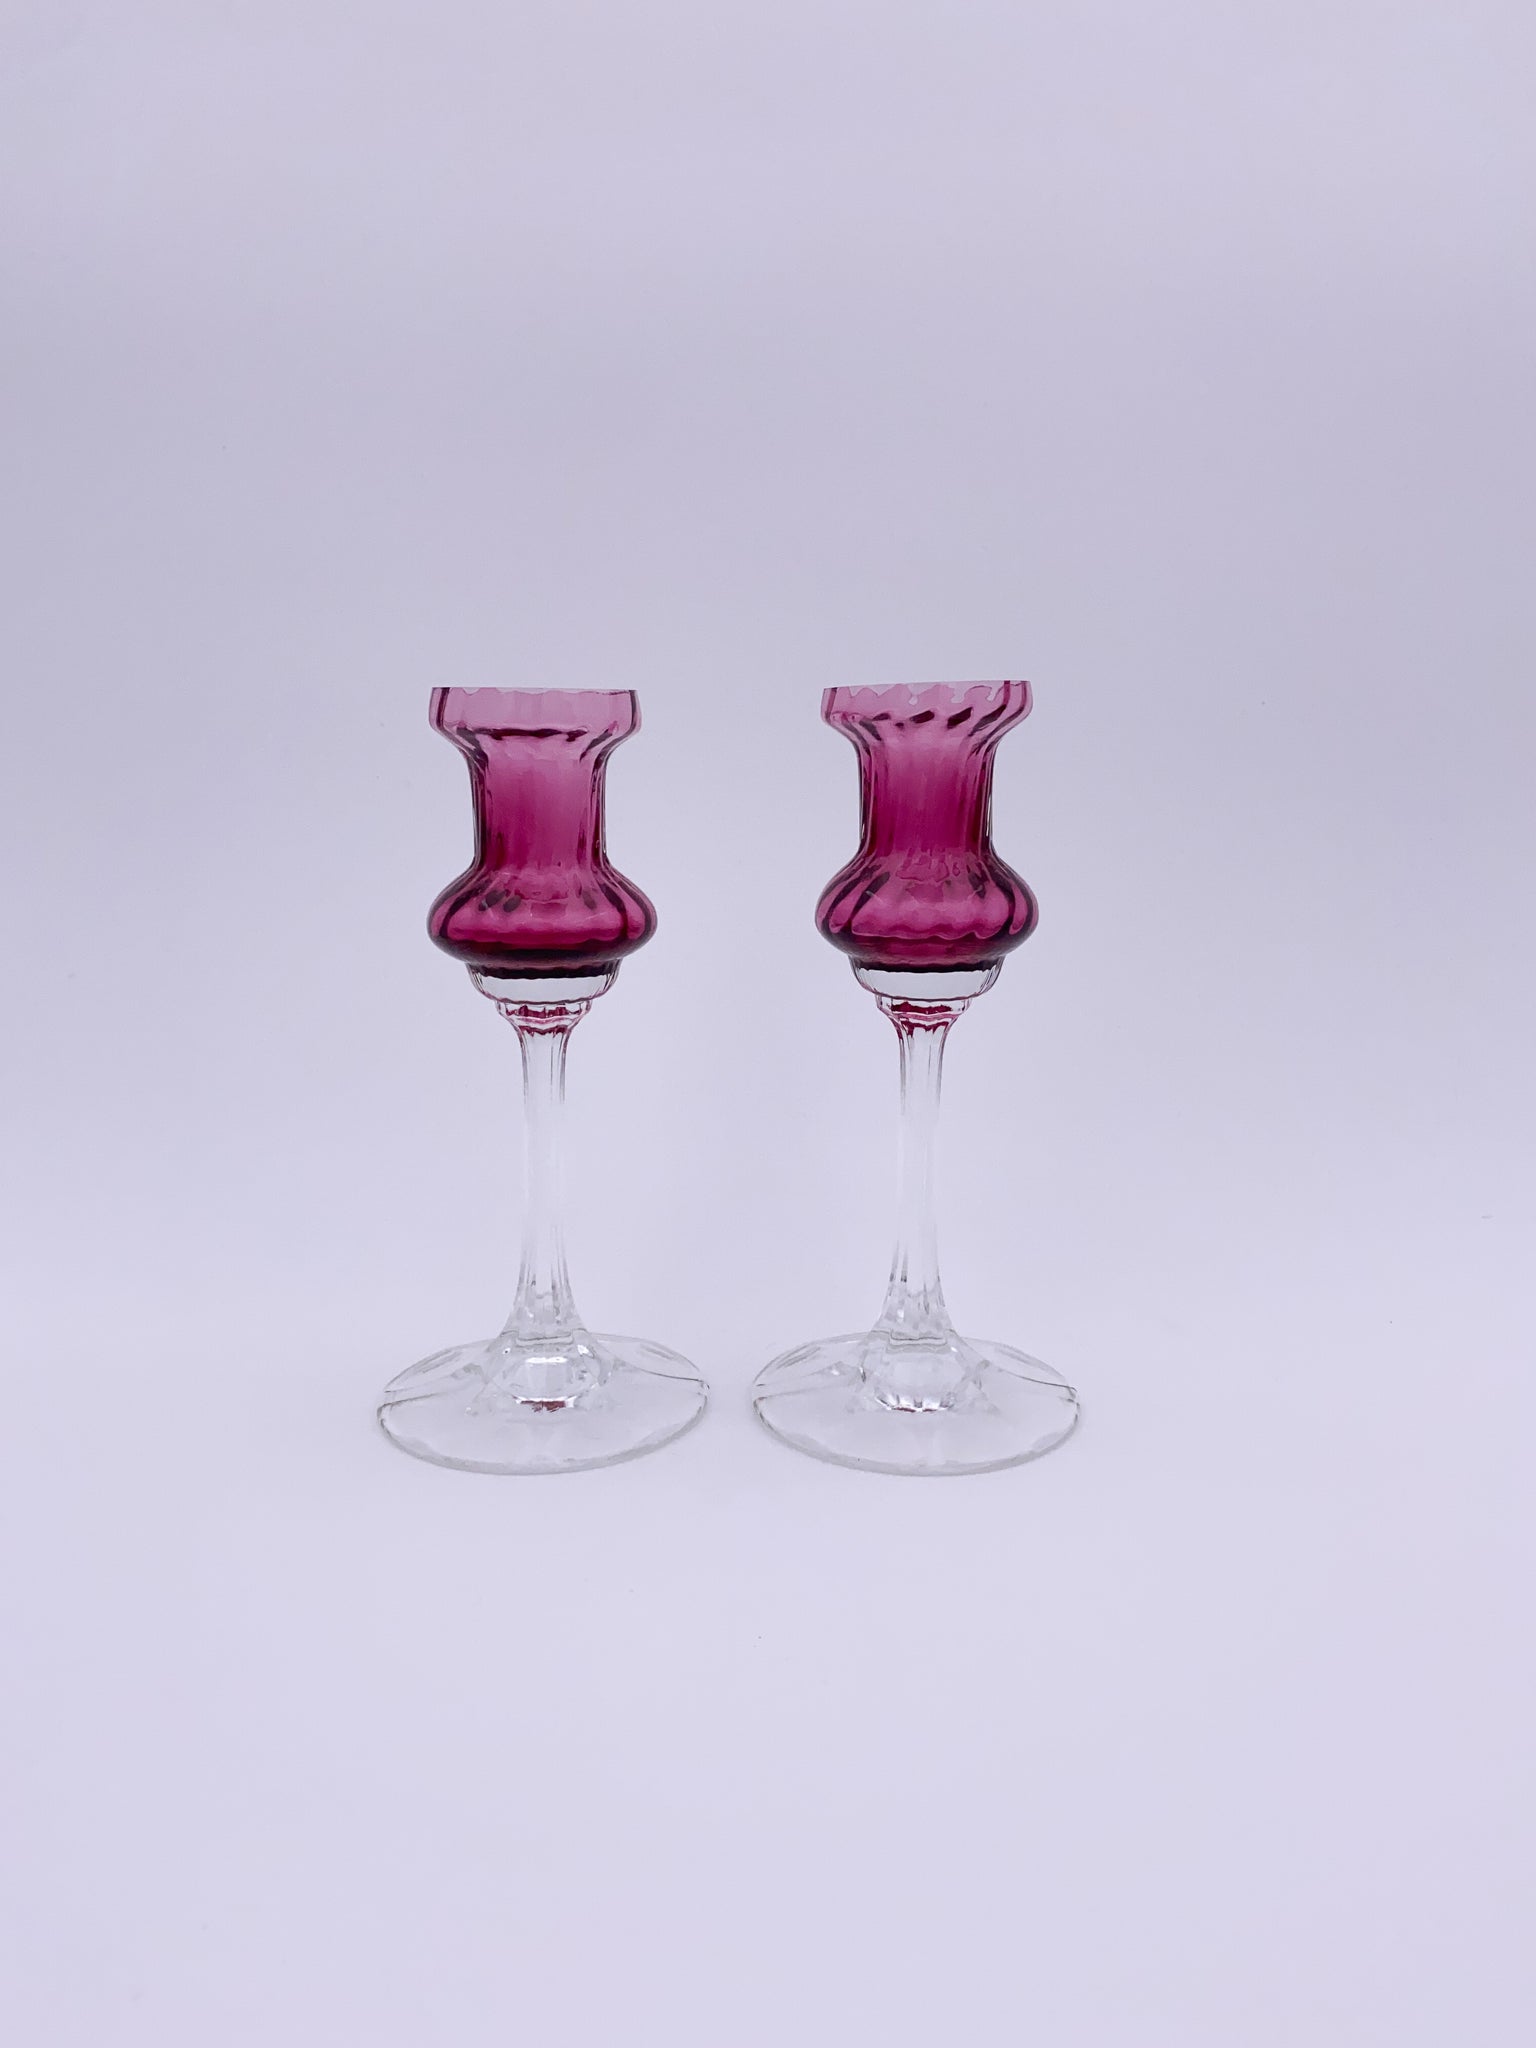 Cranberry Candle Holder Pair